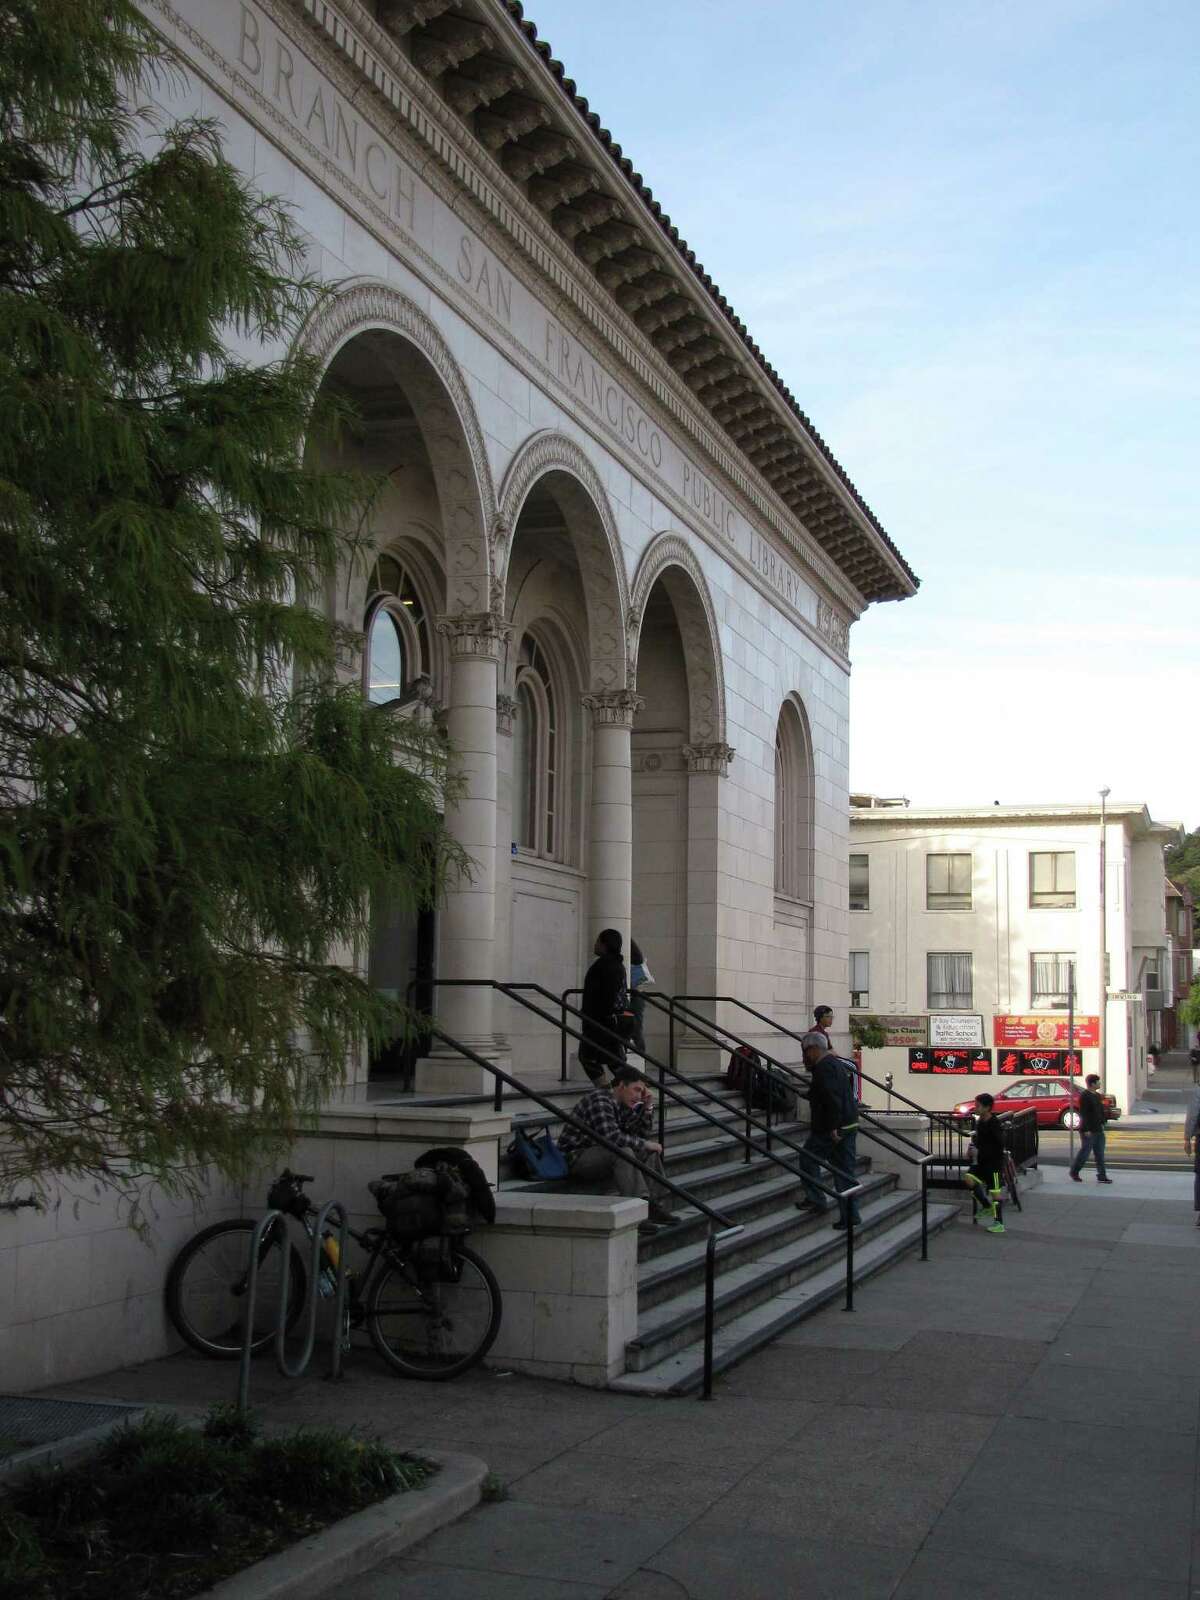 The Sunset branch of San Francisco's public library was built in 1918, one of seven financed all or in part by money from steel tycoon Andrew Carnegie. The architect was G. Albert Lansburgh. It reopened in 2007 with an update by Fougeron Architecture.